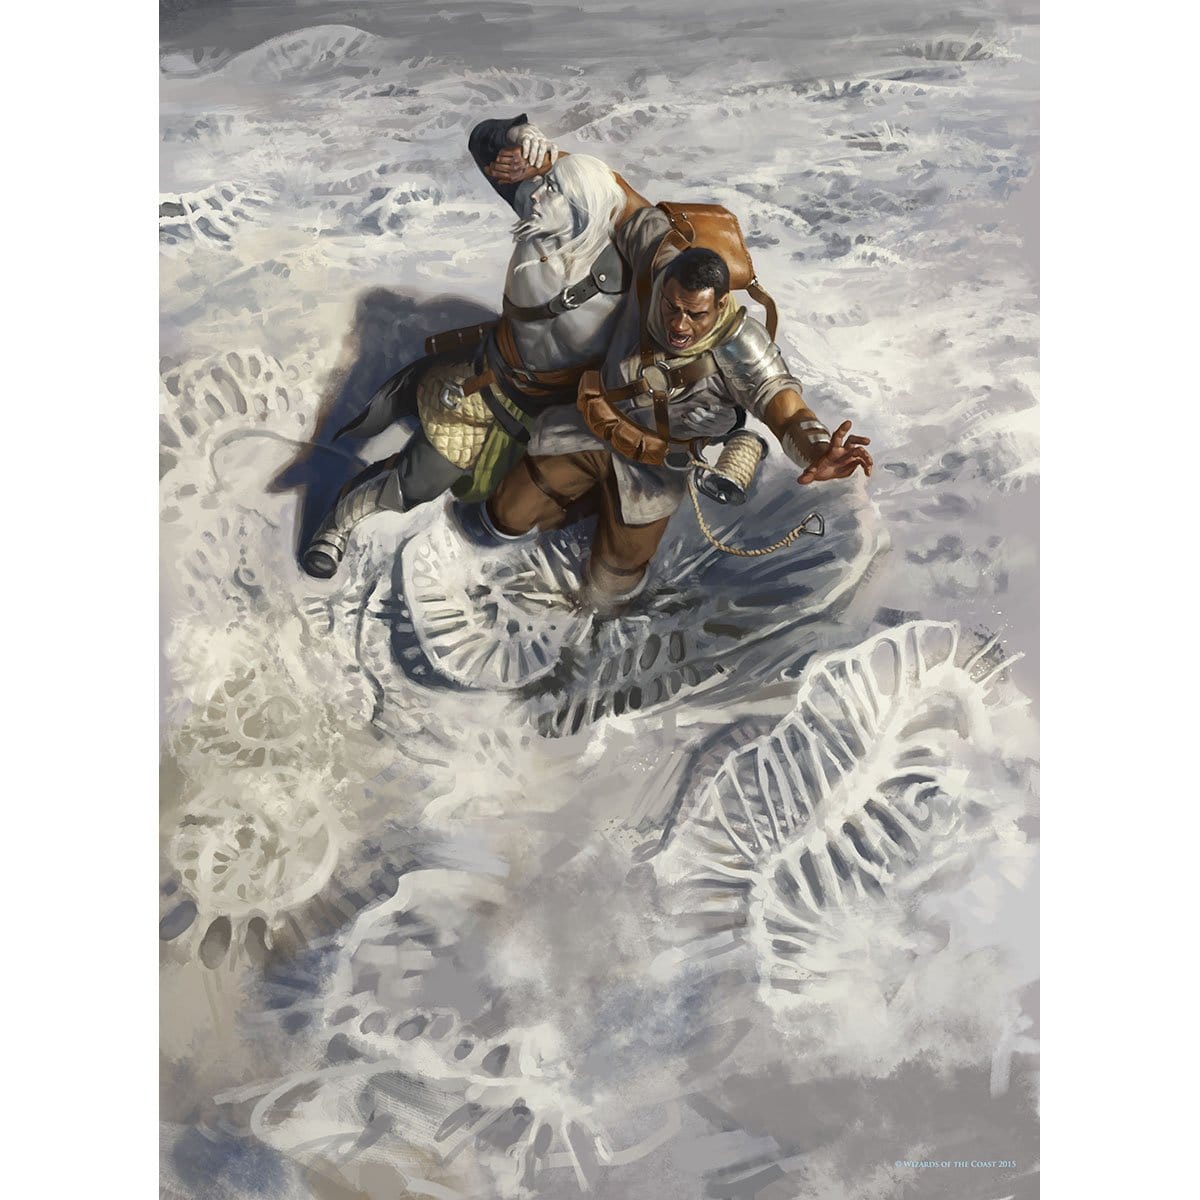 Adverse Conditions Print - Print - Original Magic Art - Accessories for Magic the Gathering and other card games